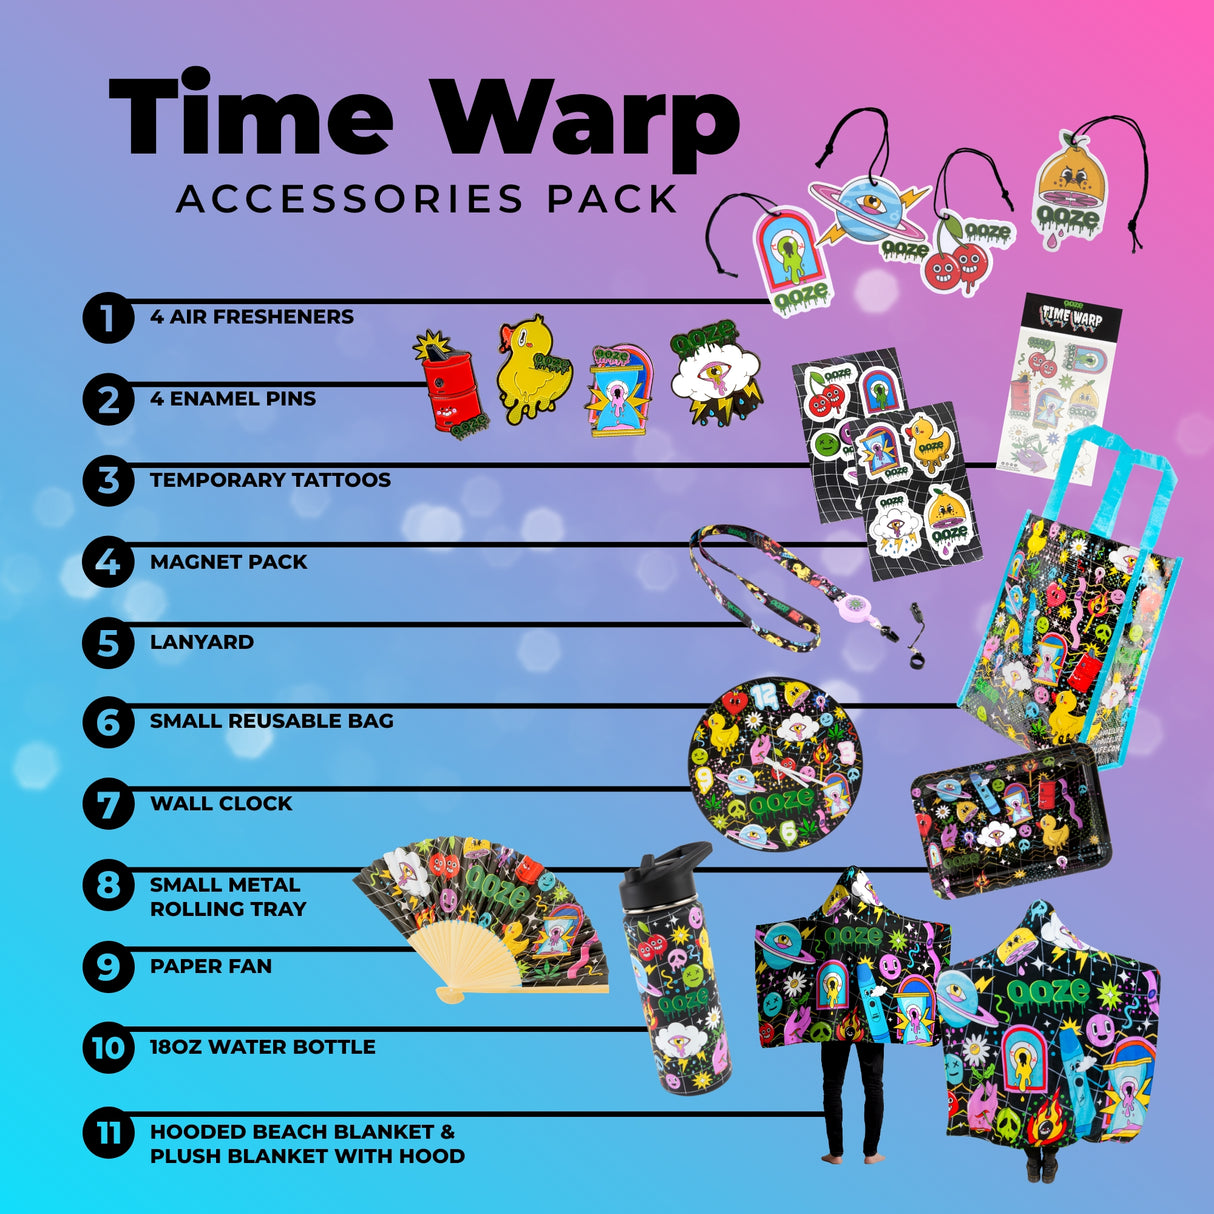 A list showing all 18 items included in the Ooze Time Warp Accessories Pack